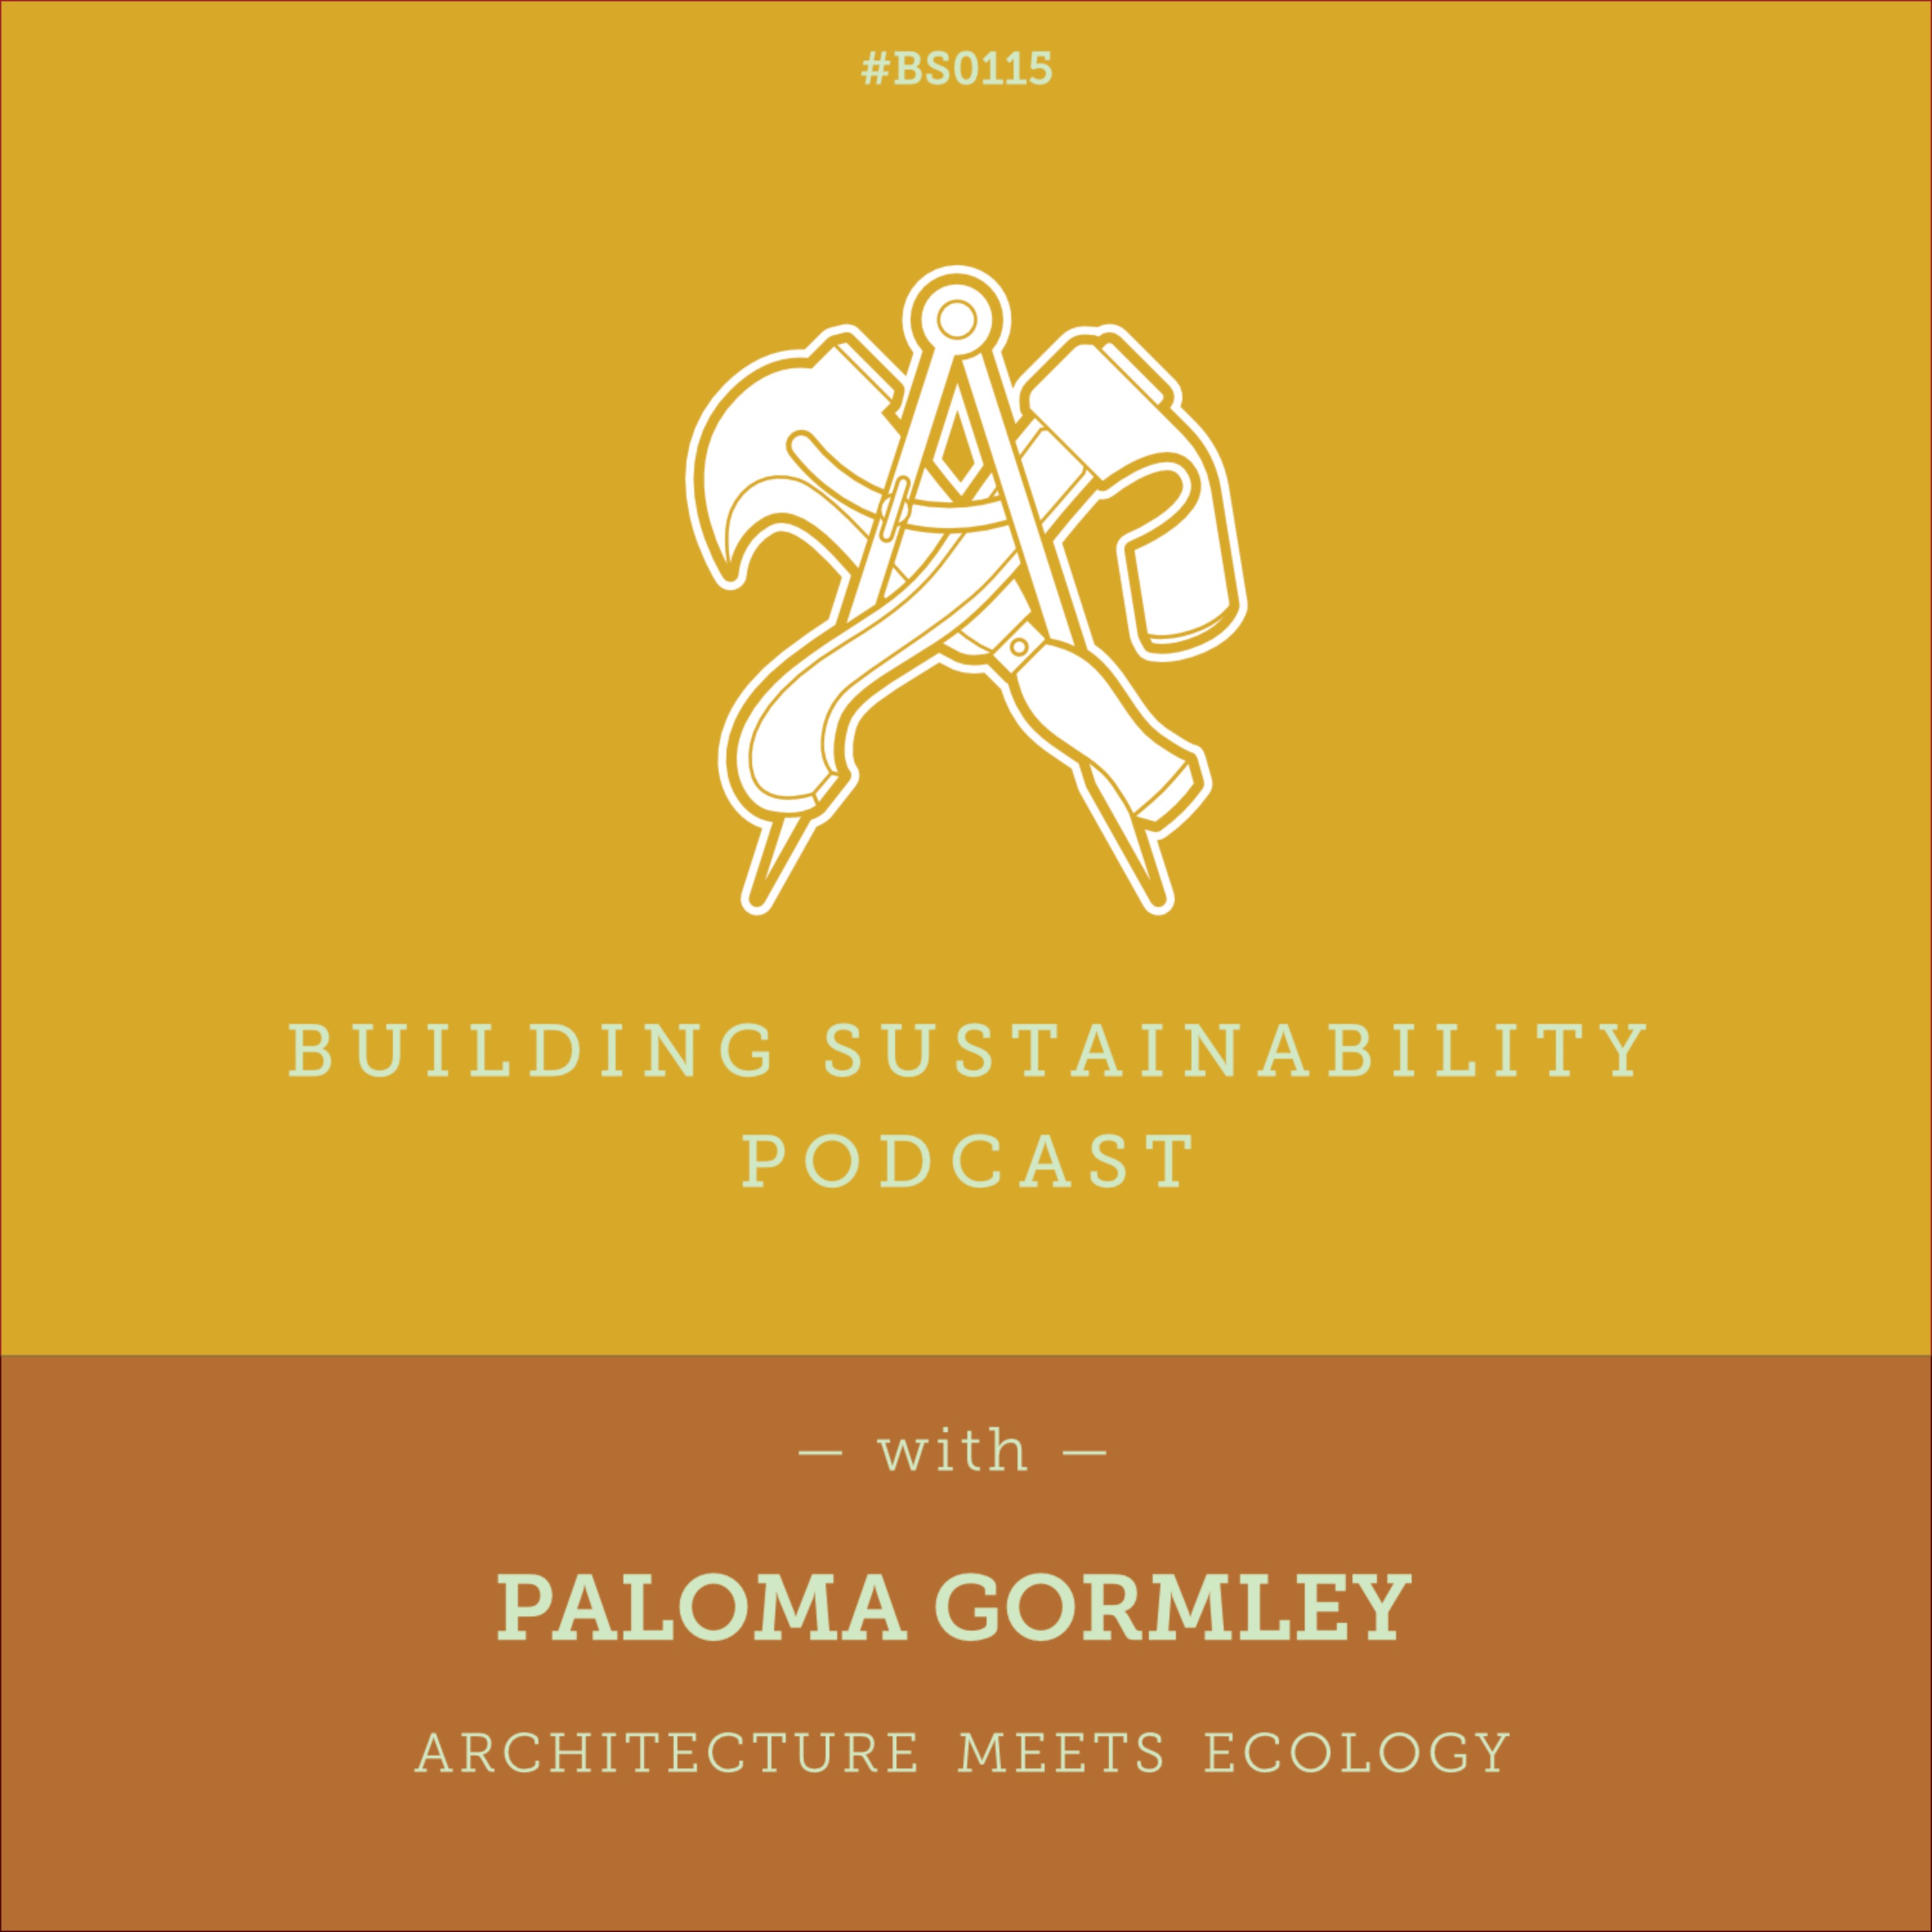 Architecture from Ecology - Paloma Gormley - BS115